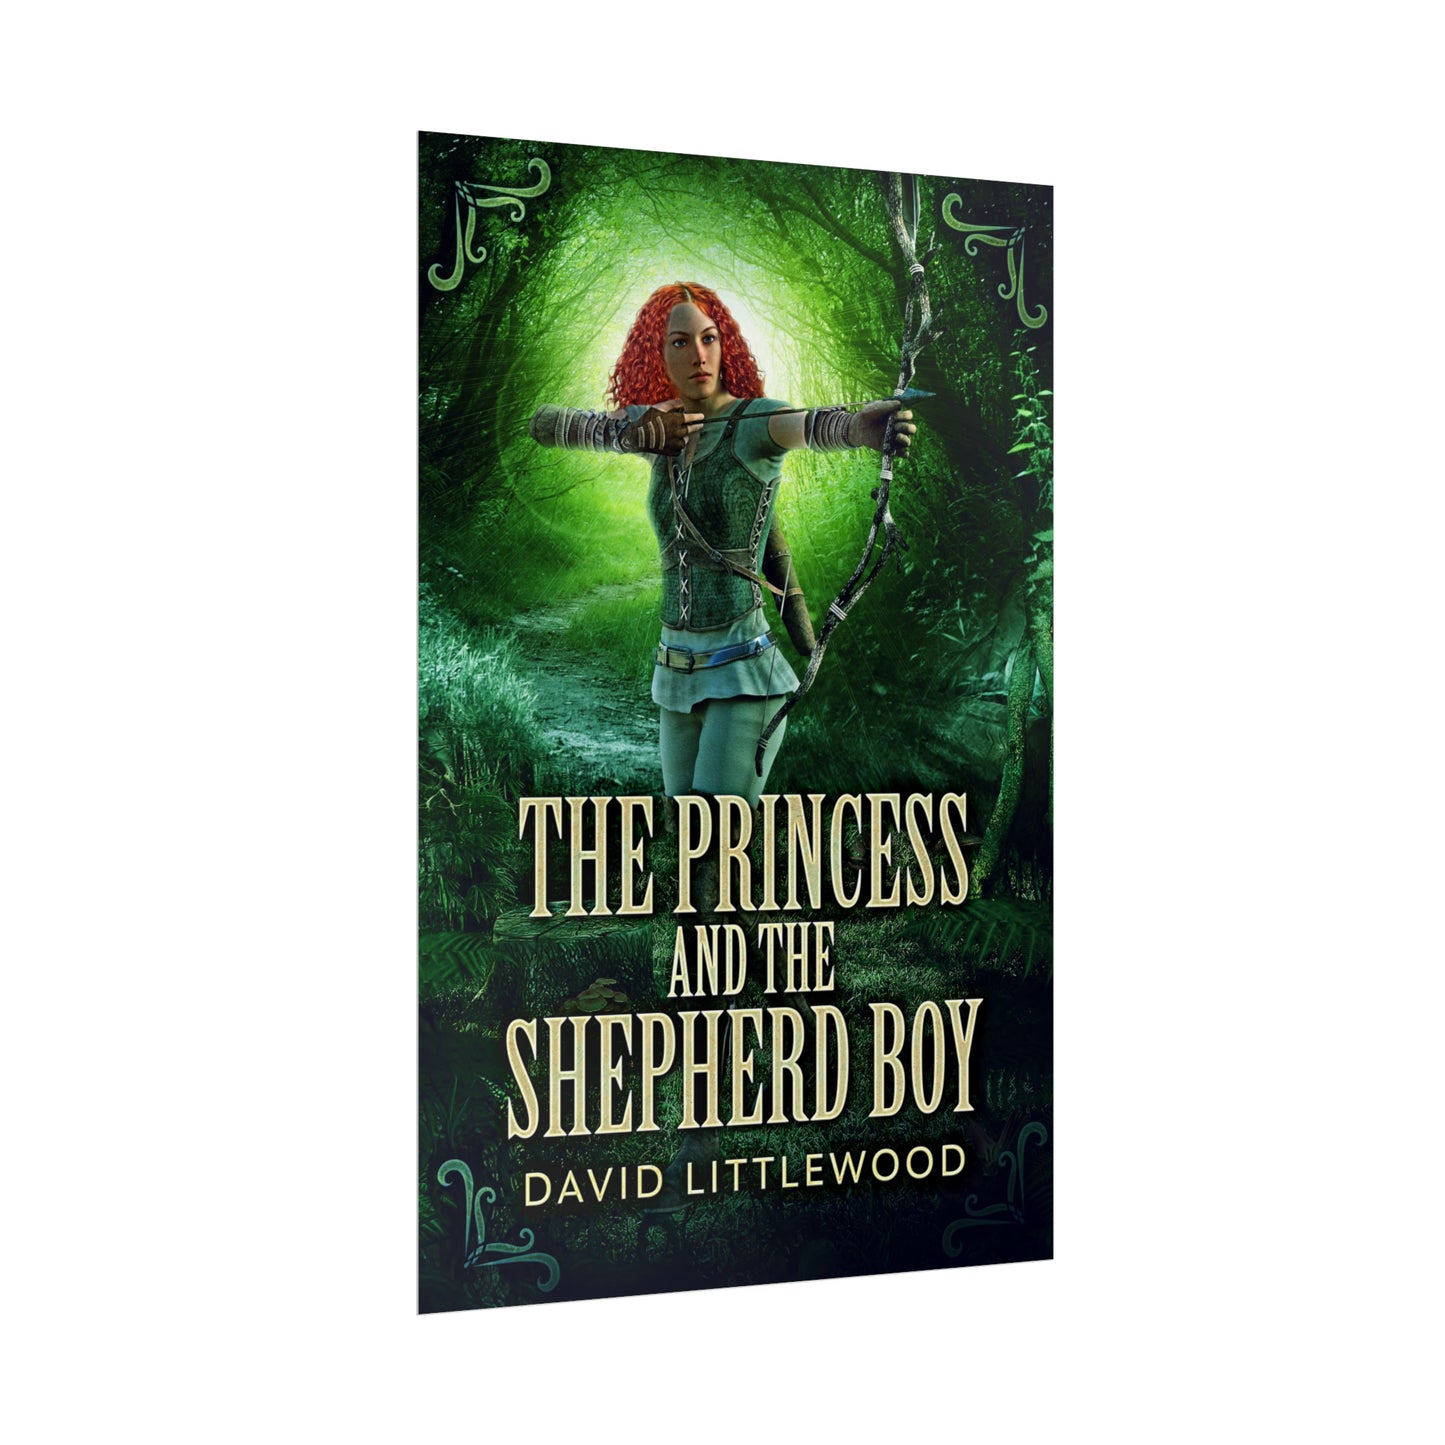 The Princess And The Shepherd Boy - Rolled Poster